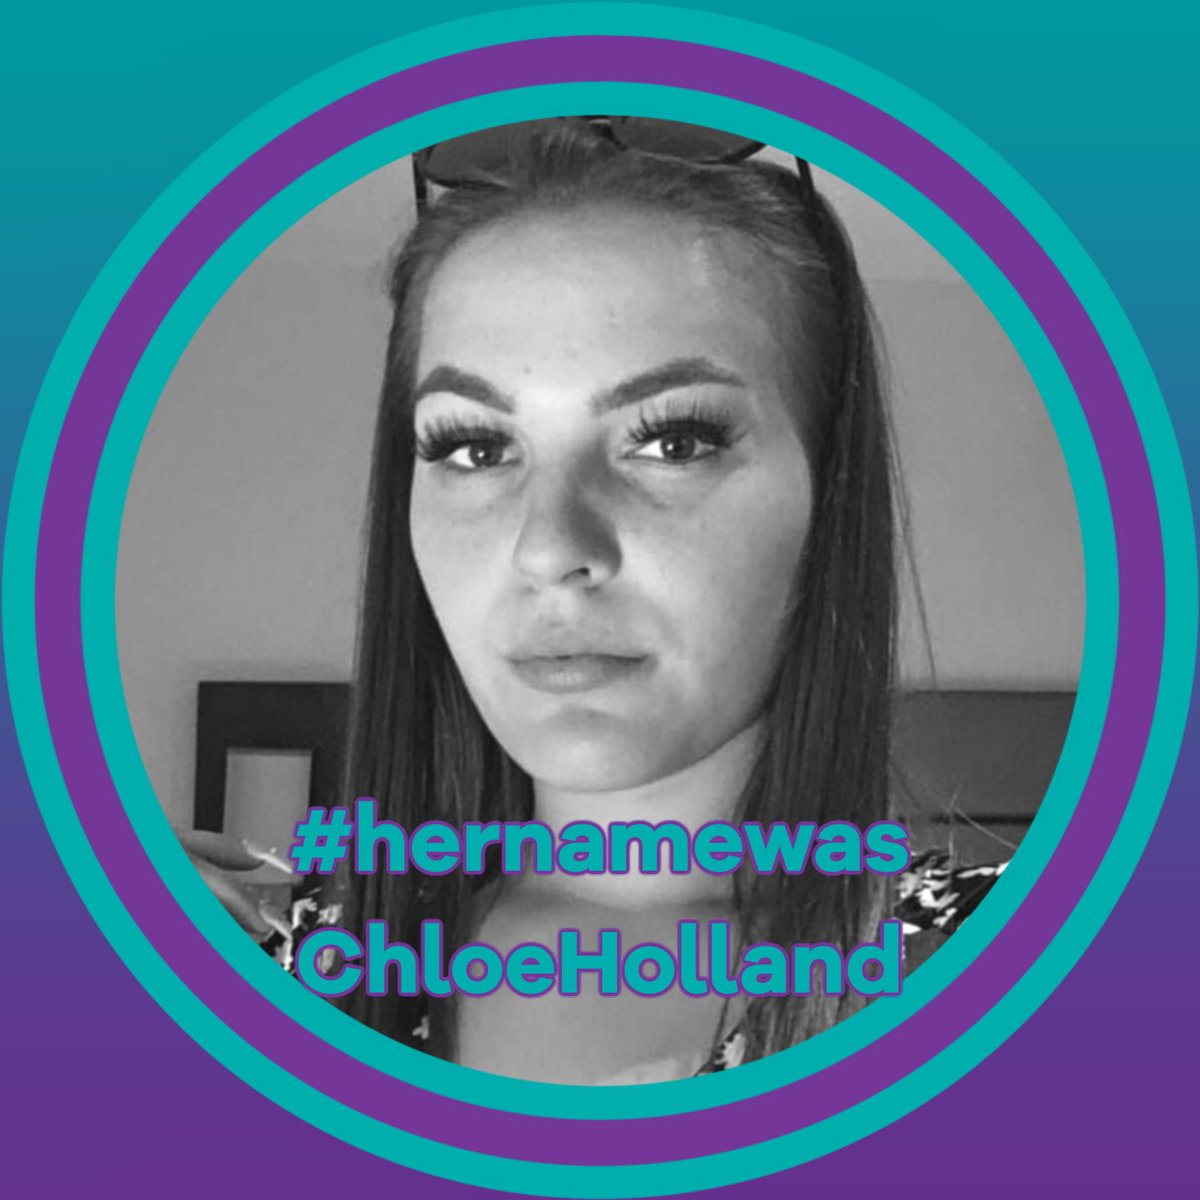 And most importantly: ThinkingBigger Ltd is proud to be supporting the #HerNamewasChloeHolland campaign to make a statutory offence of manslaughter by coercive or controlling behaviour.